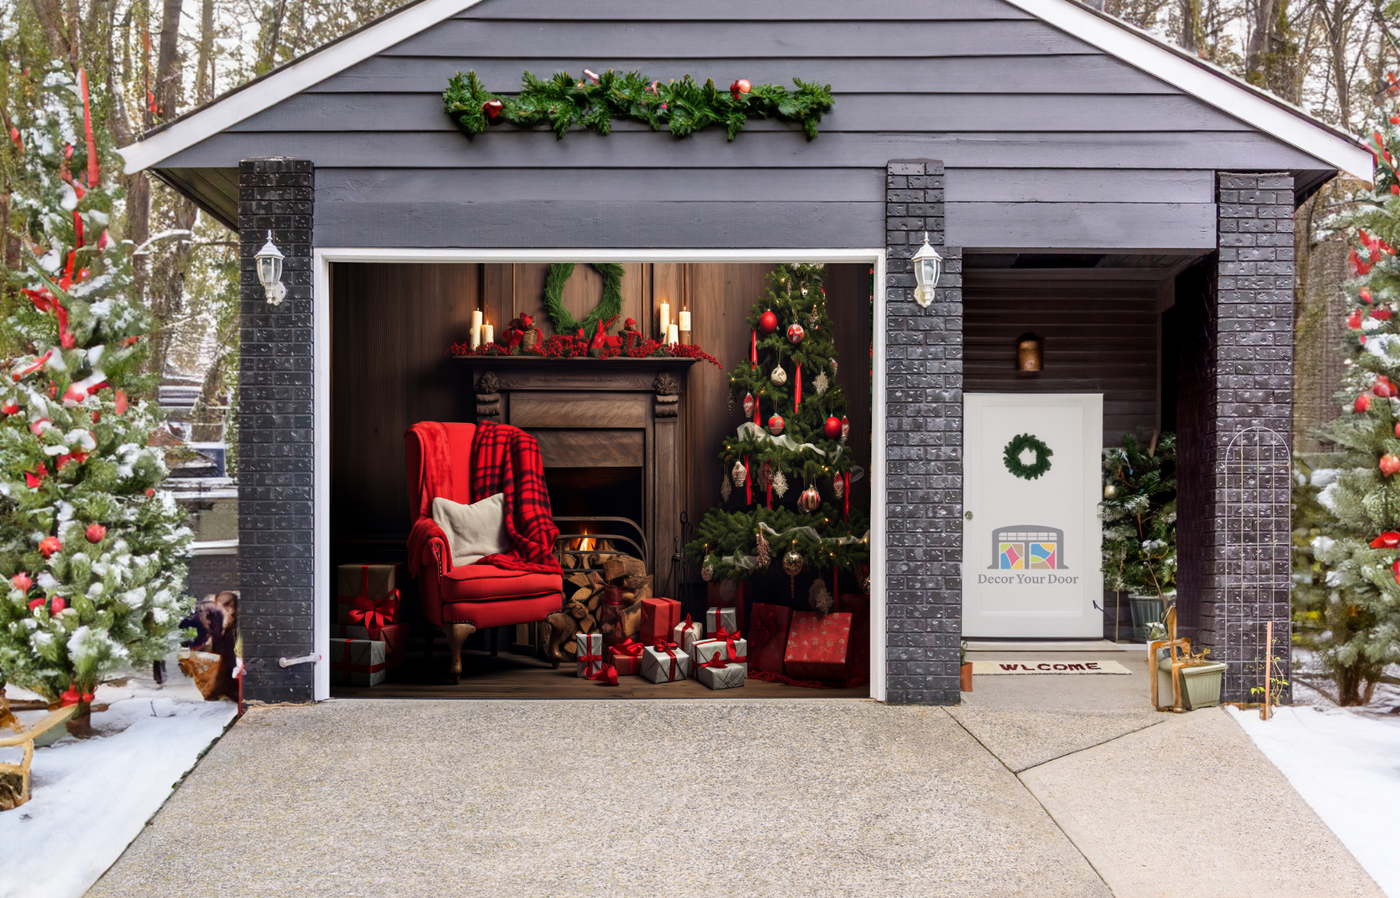 Christmas Interior Room Fireplace, Christmas Tree, Green Chair with a Red Blanket And Gifts Garage Door Cover Wrap Backdrop Decoration